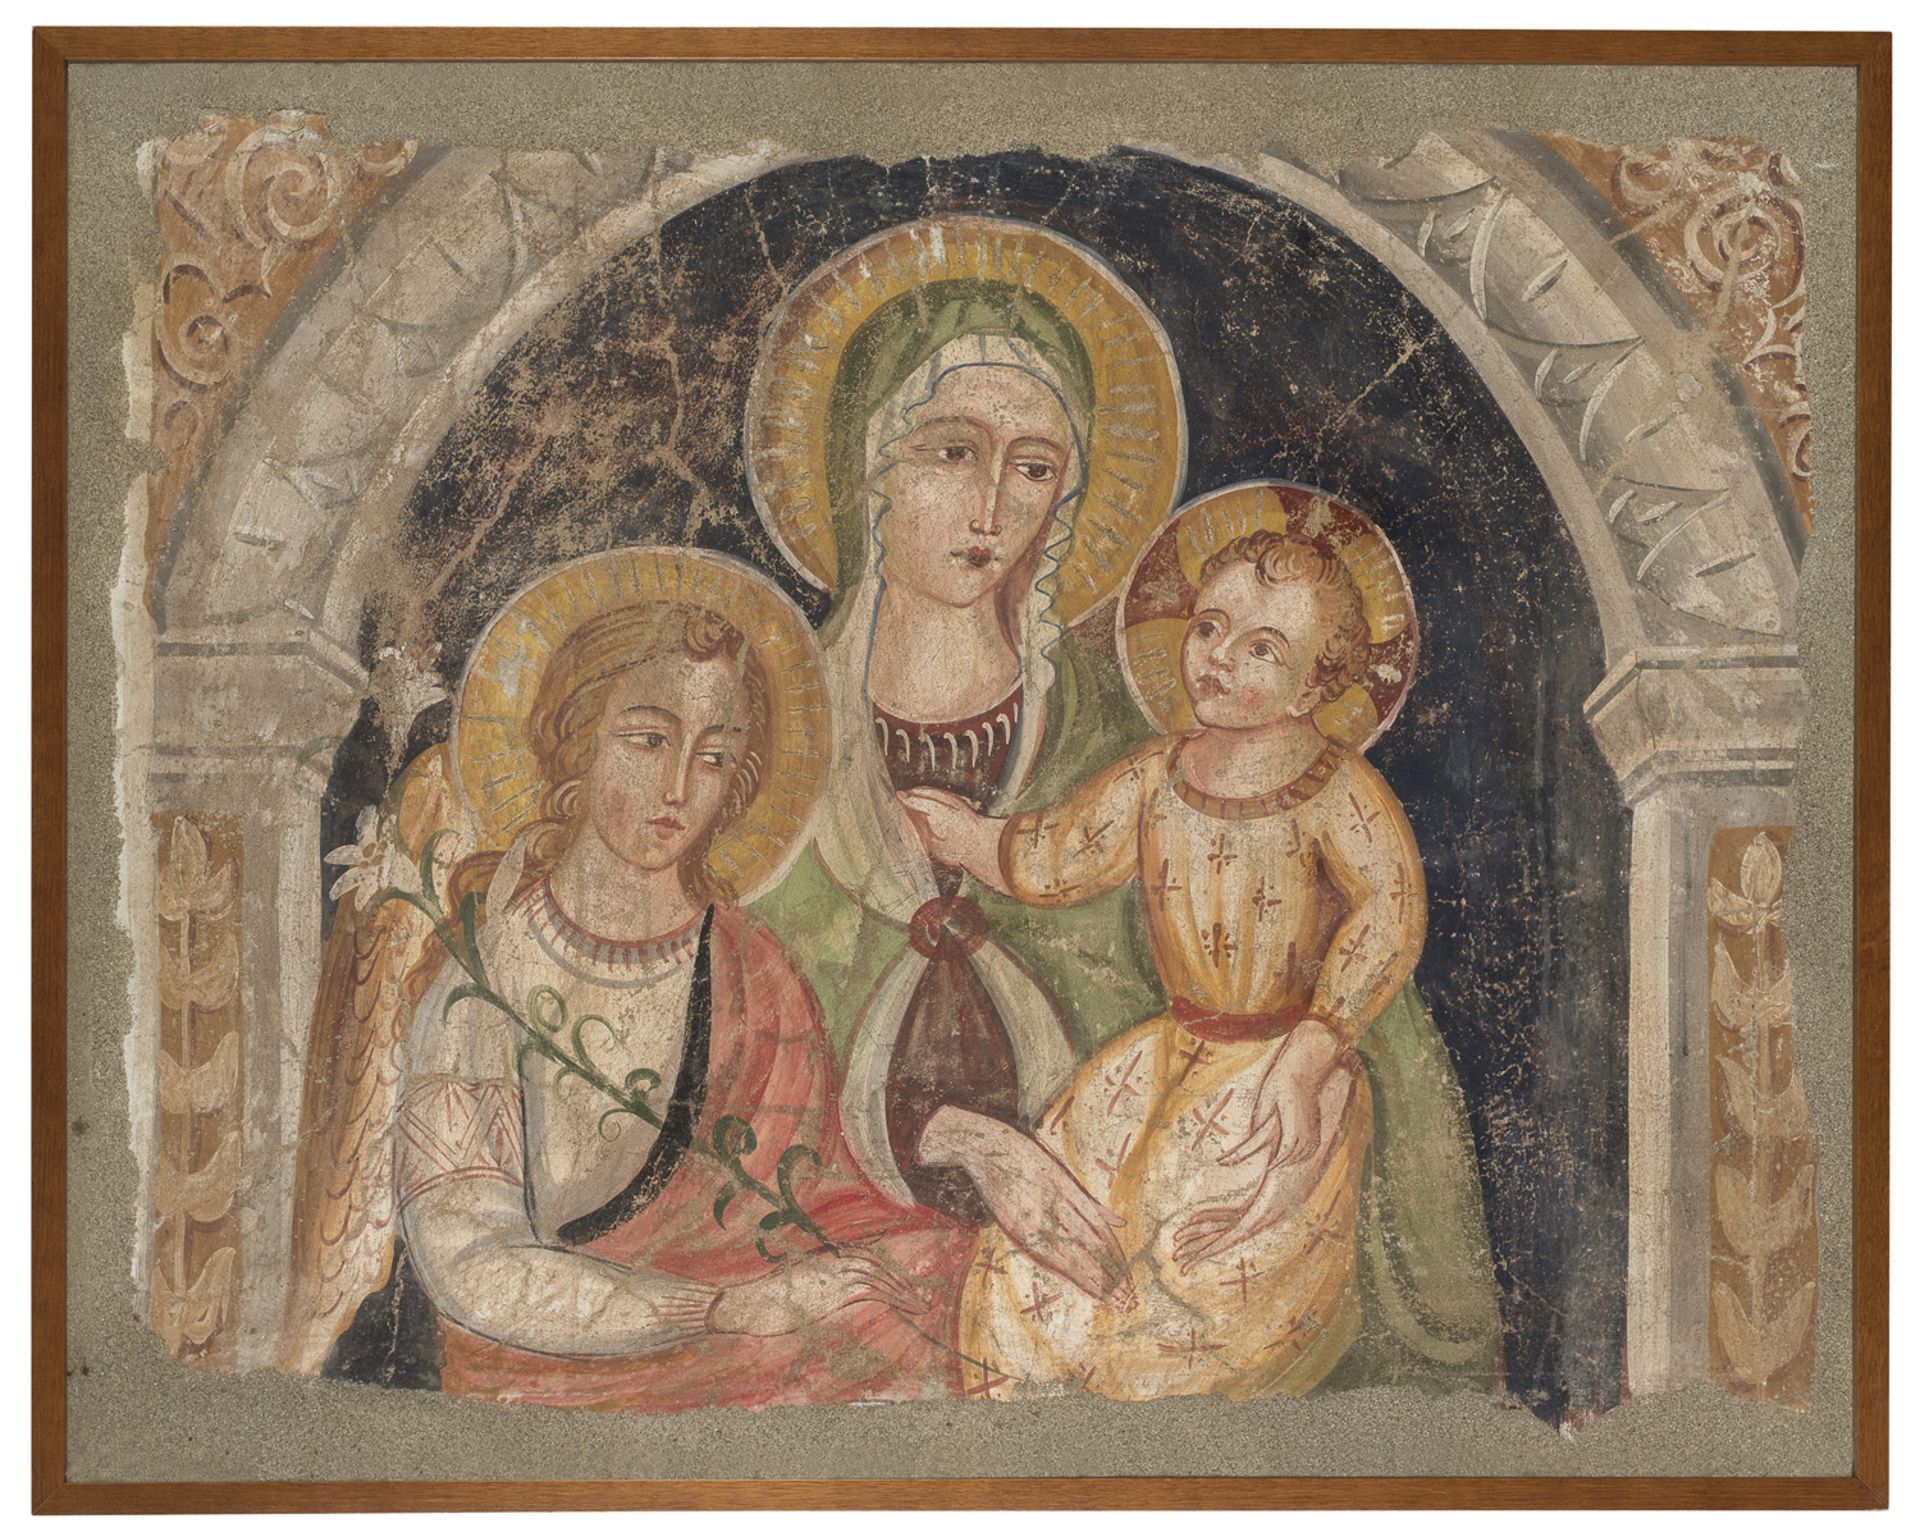 FRESCO TEAR OF VIRGIN AND CHILD IN 14TH CENTURY MANNER